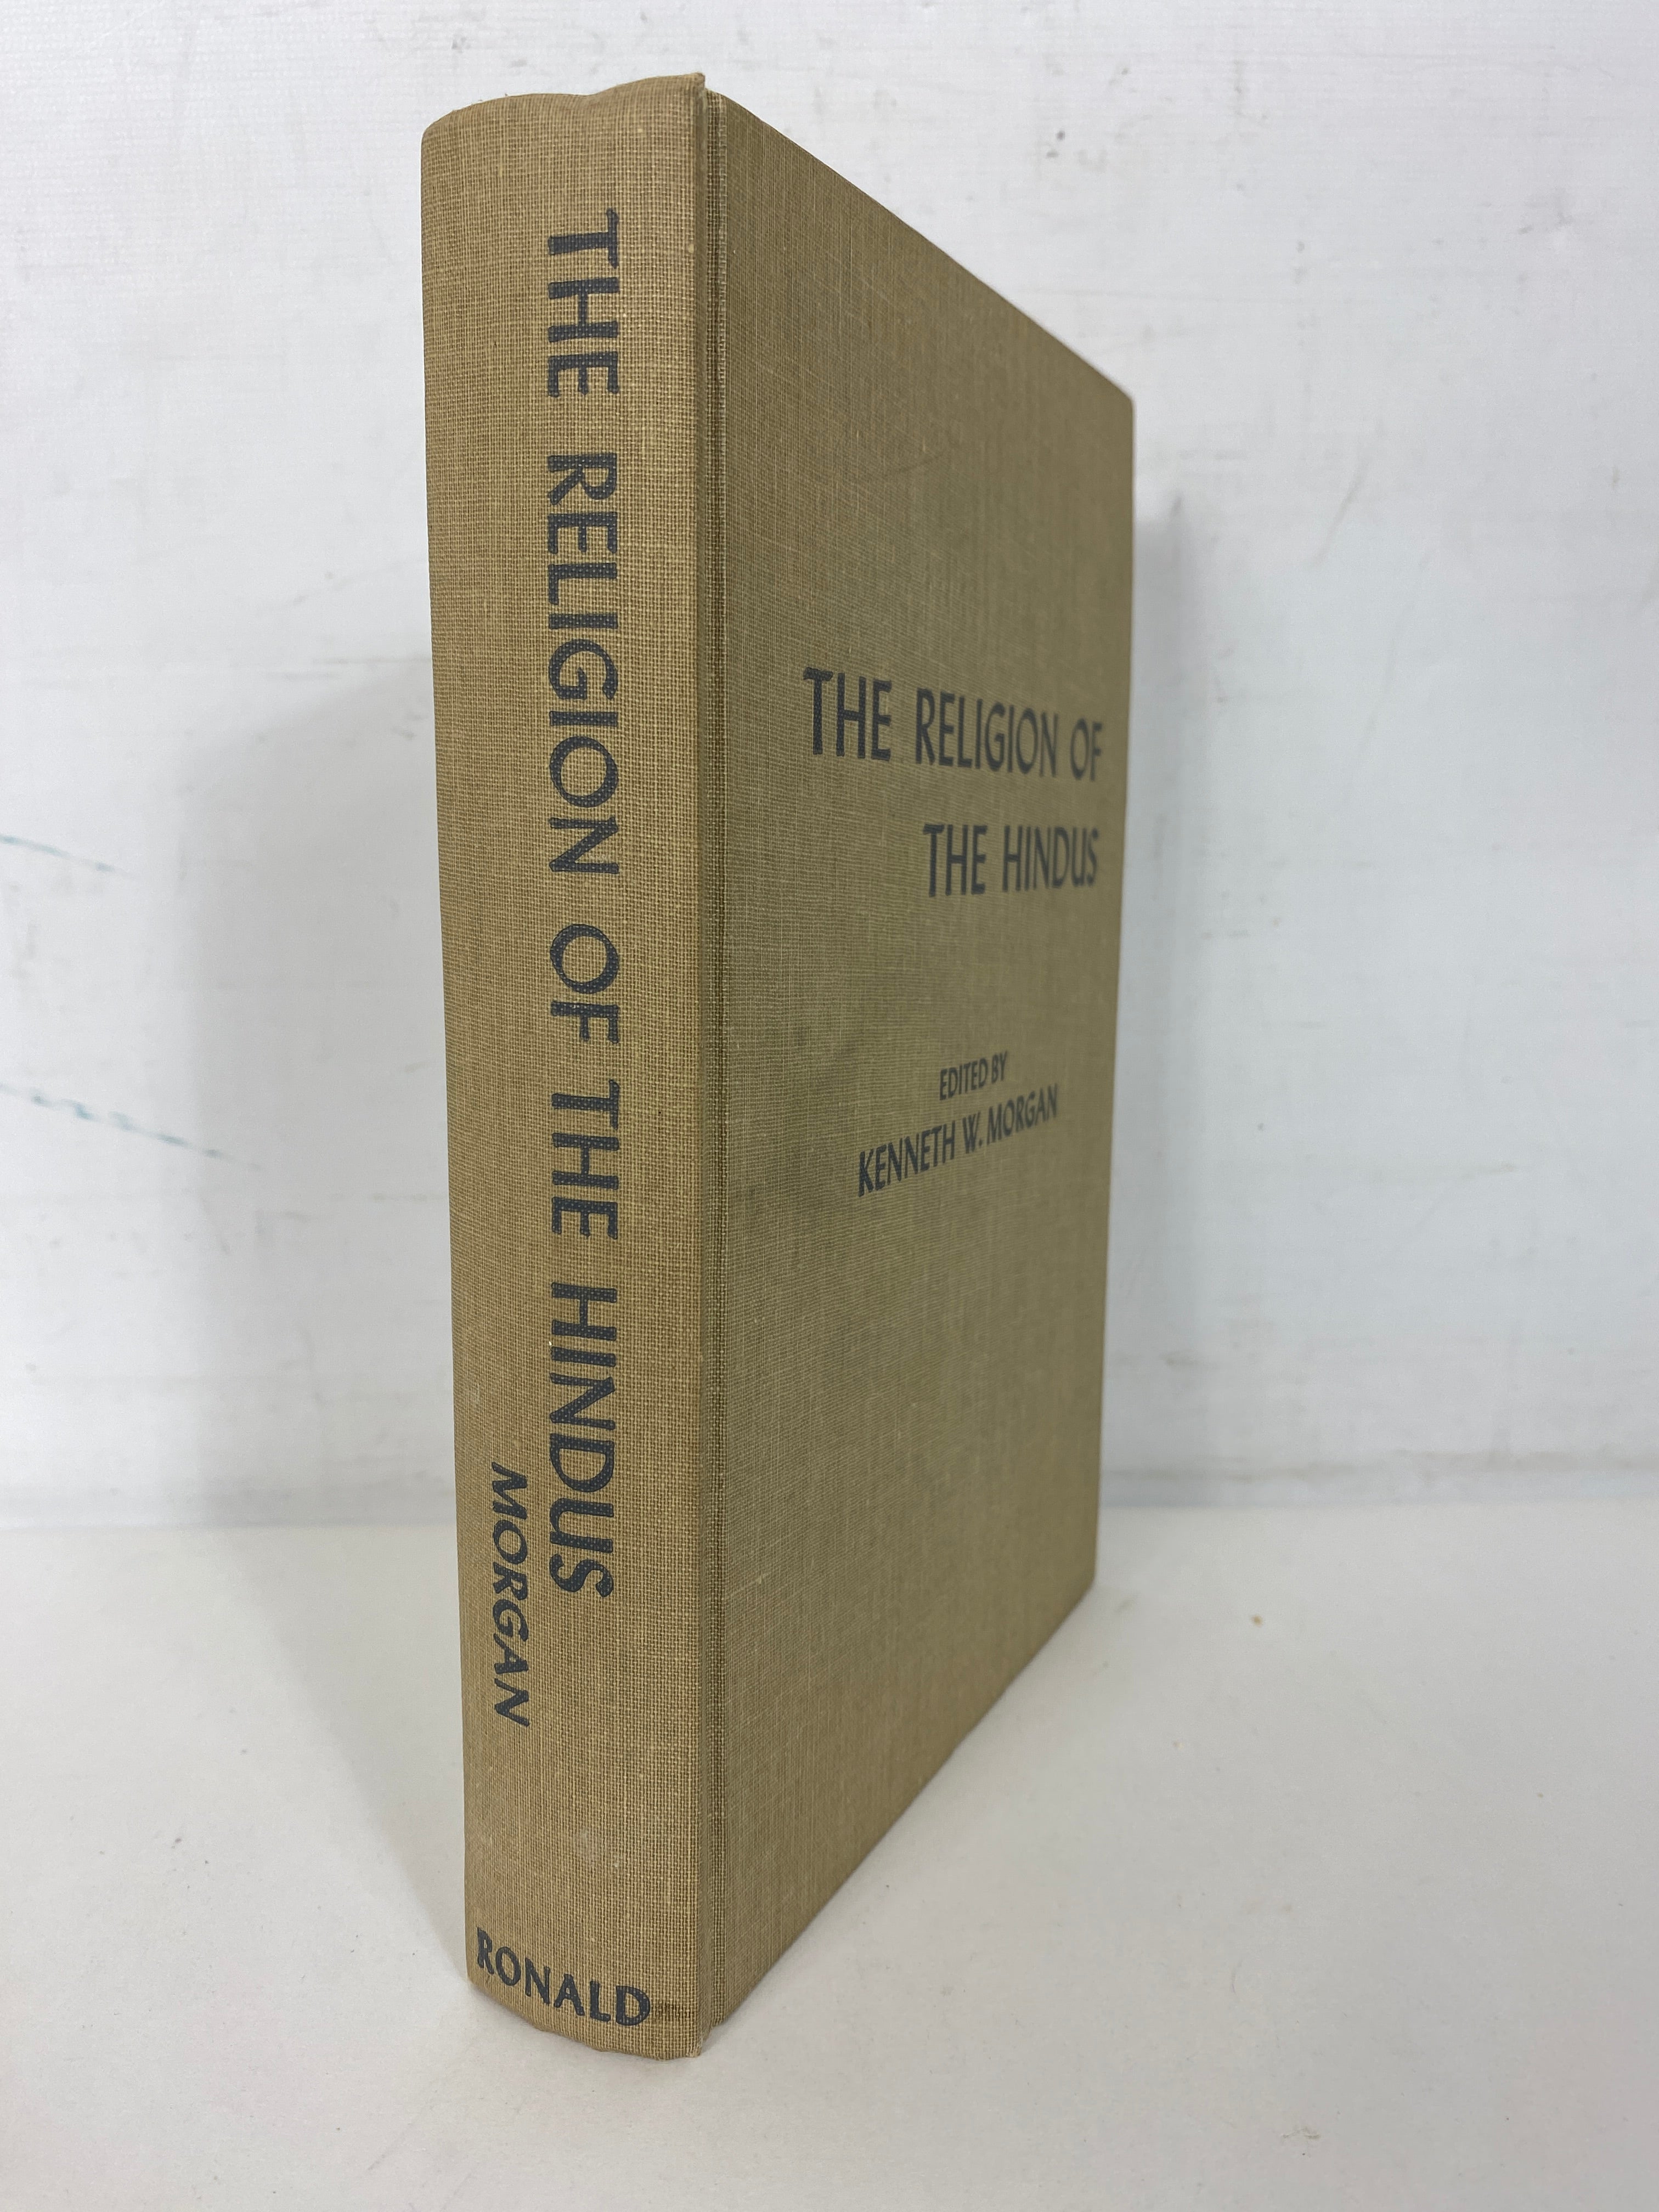 The Religion of the Hindus by Kenneth Morgan 1953 HC